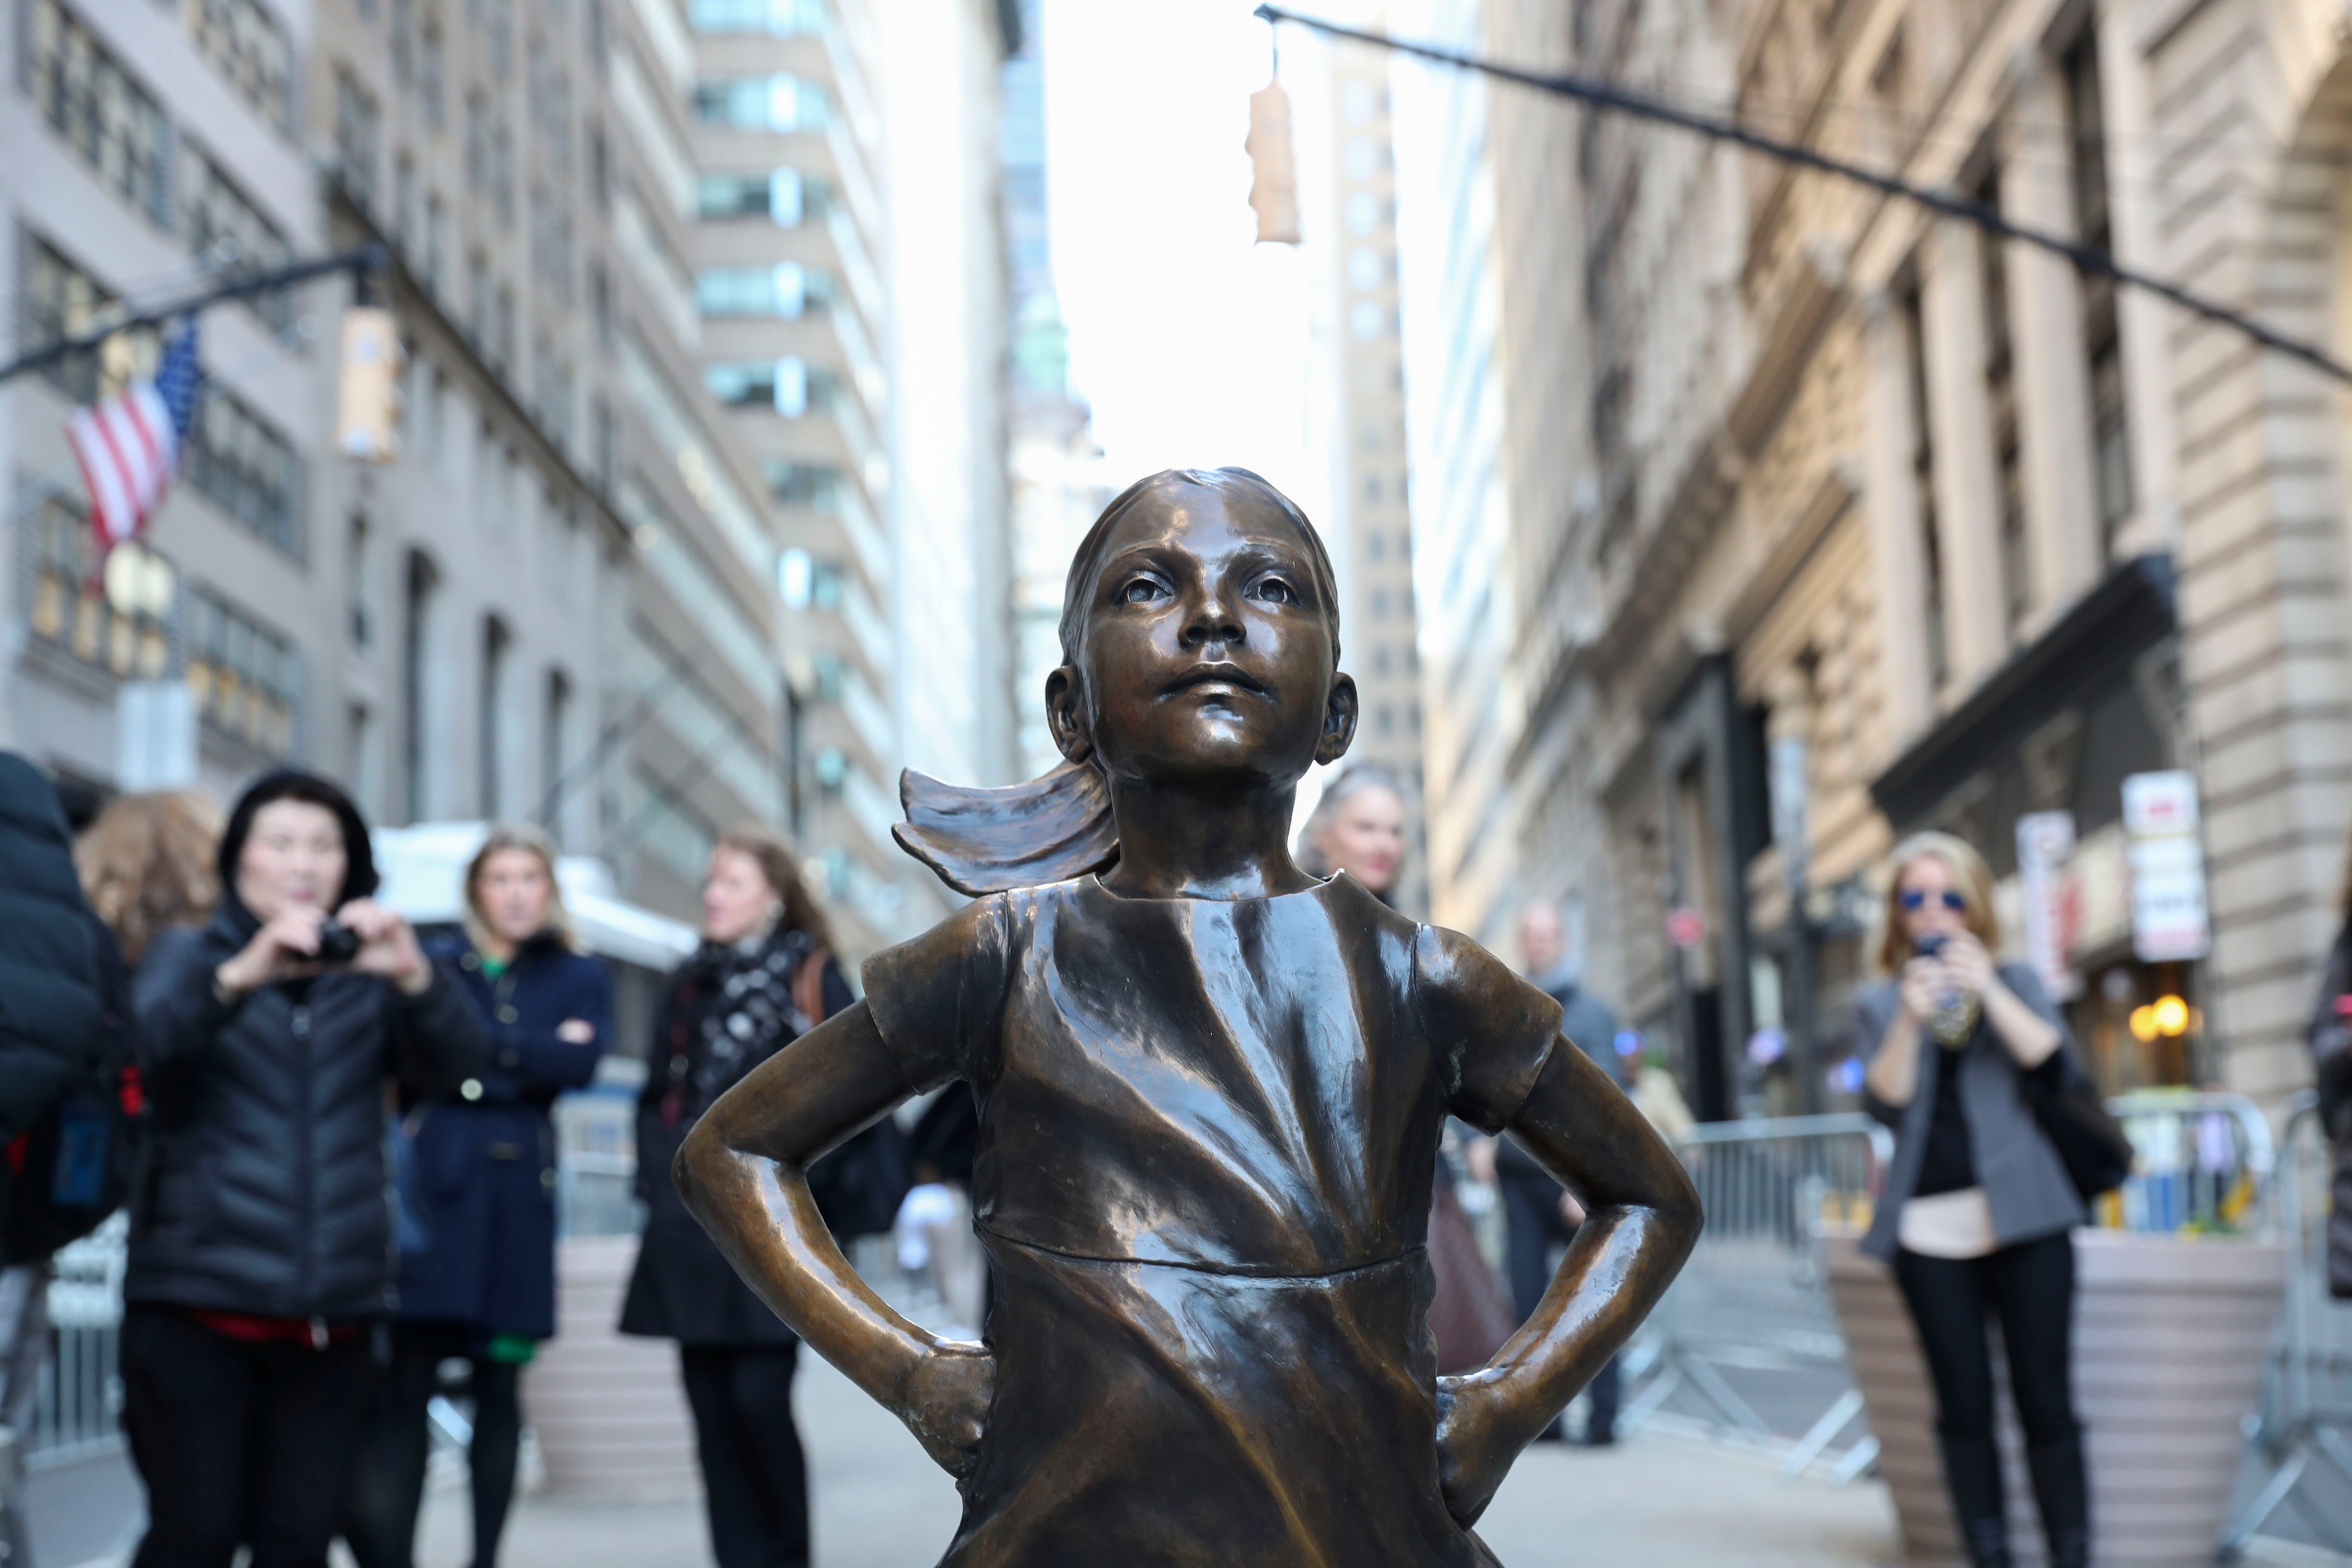 NEW YORK, March 9, 2017:   Photo taken on March 9, 2017 shows the "fearless girl" statue facing the bronze bull statue near the Wall Street in New York, the United States. The "fearless girl" was put there by an investment firm which said the idea was to call attention to the lack of gender diversity in management of companies as well as how few women work in financial services, and the fact that they get paid less than men. (Xinhua/Wang Ying via Getty Images) (Xinhua News Agency&mdash;Xinhua News Agency/Getty Images)